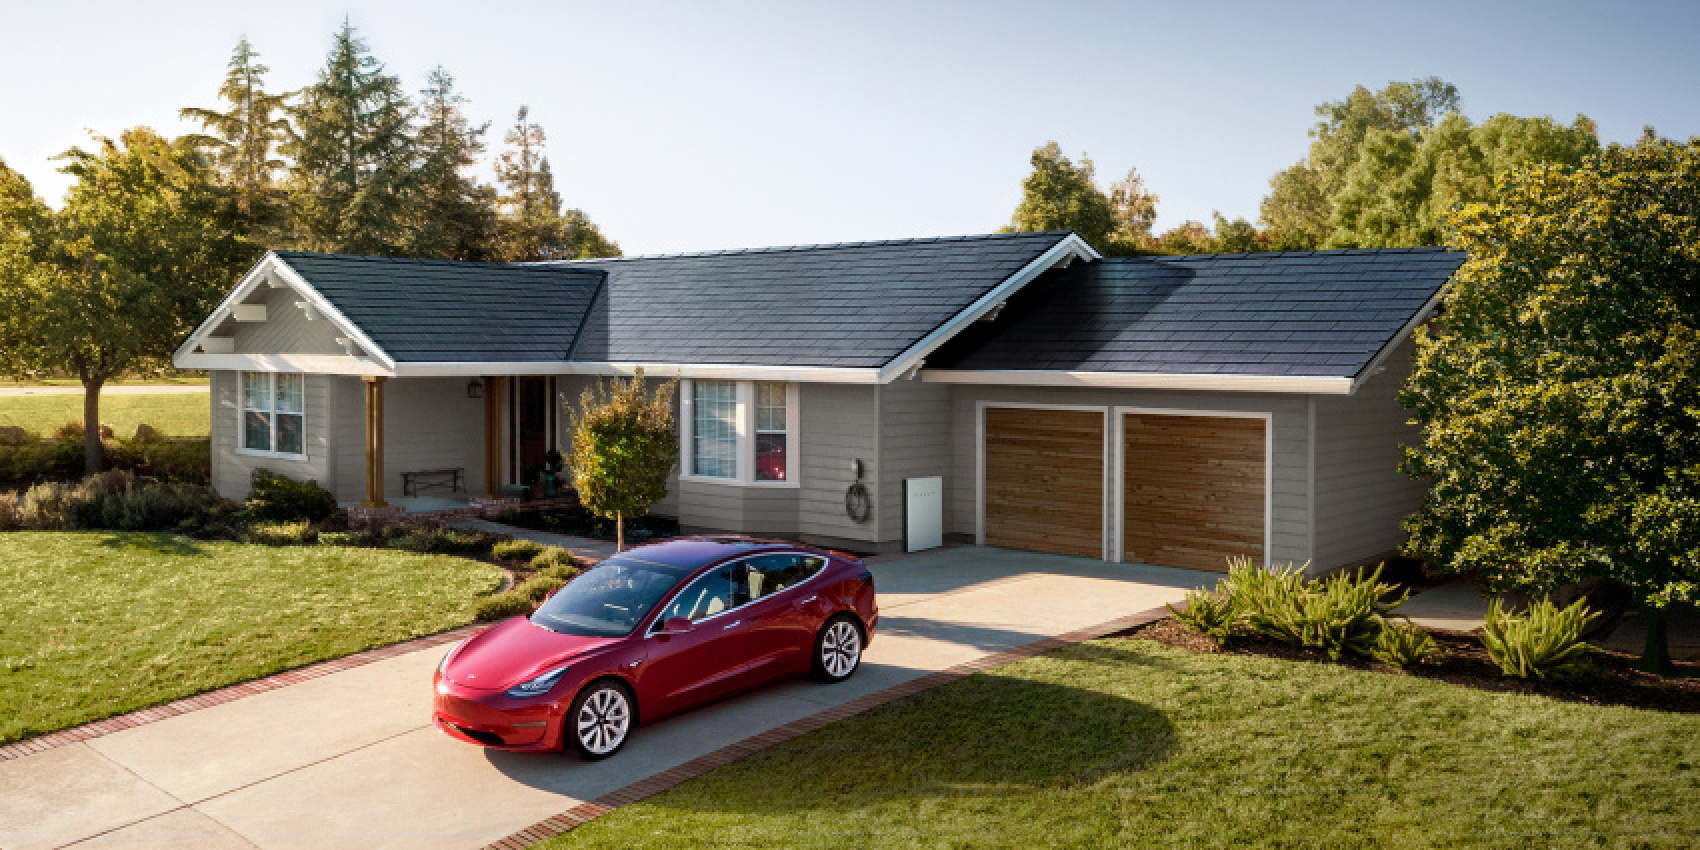 autos, cars, tesla, tesla supply chain issues now extend to solar roof, stops scheduling new installation for now